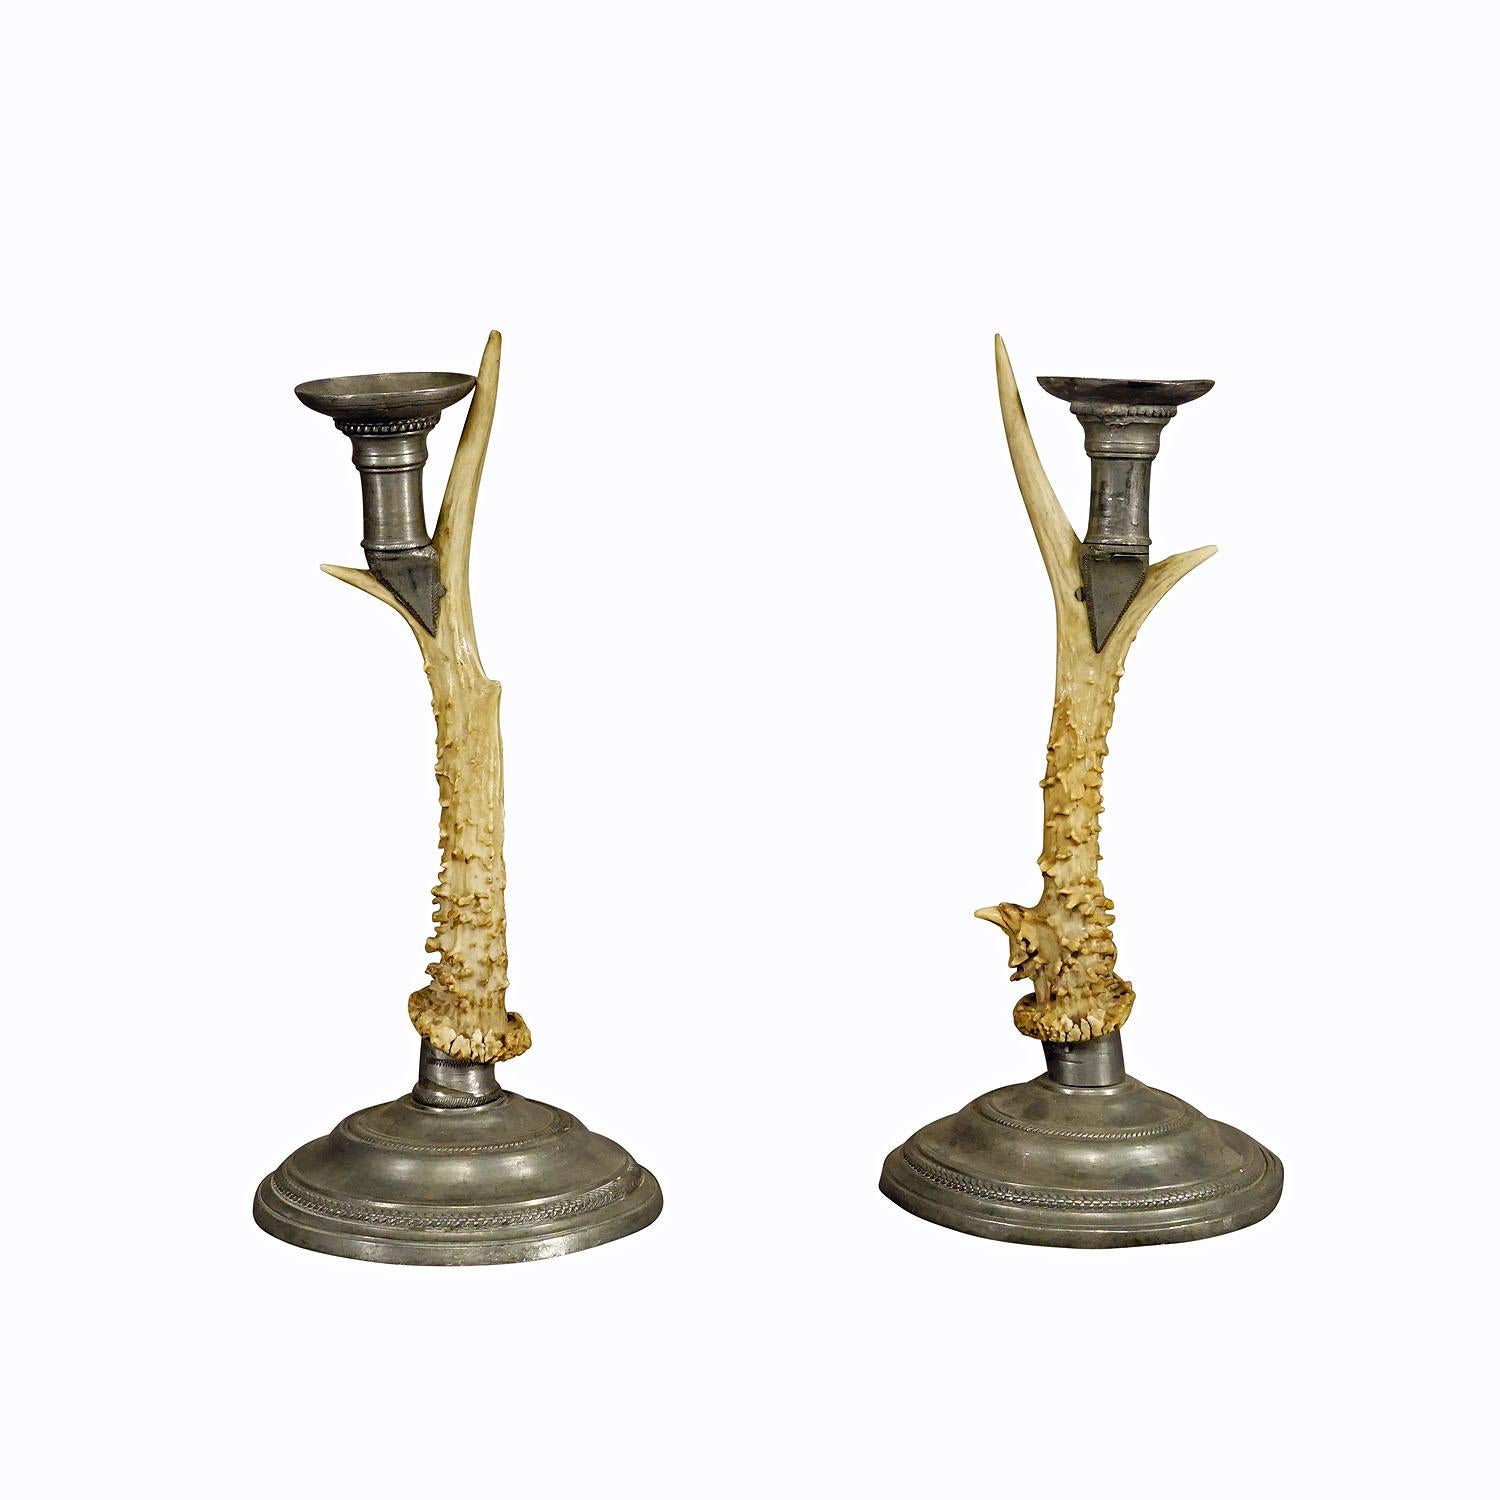 Pair Black Forest Candle Holders with Pewter Base and Spout, Germany circa 1860s

An antique pair of Black Forest candle holders with pewter base and spouts. Each made with an original deer antler. Manufactured in South Germany mid 19th century.